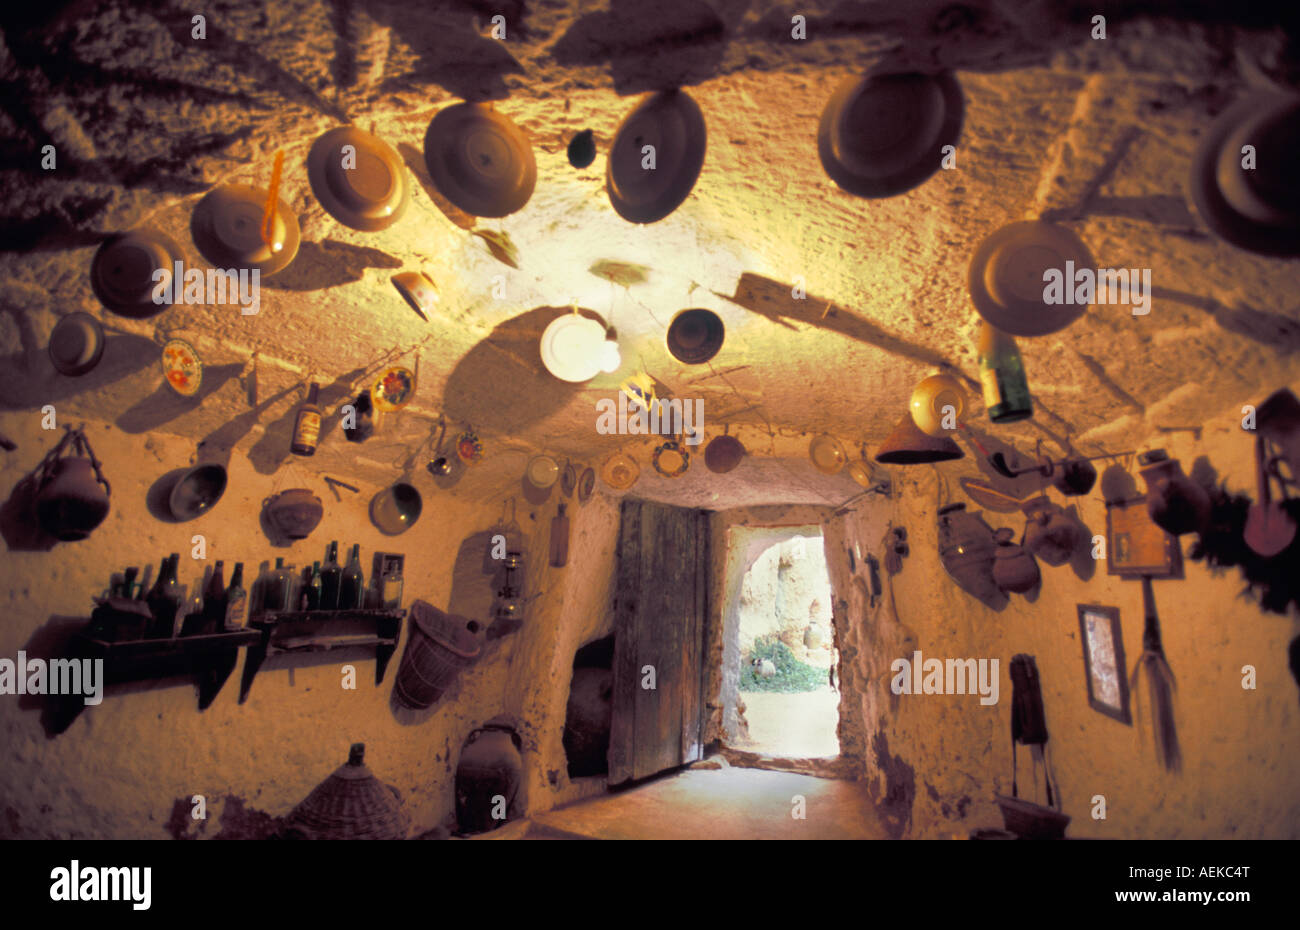 Libya Gharyan Utensil displayed in house, Ancient house carved out of the rocks Stock Photo